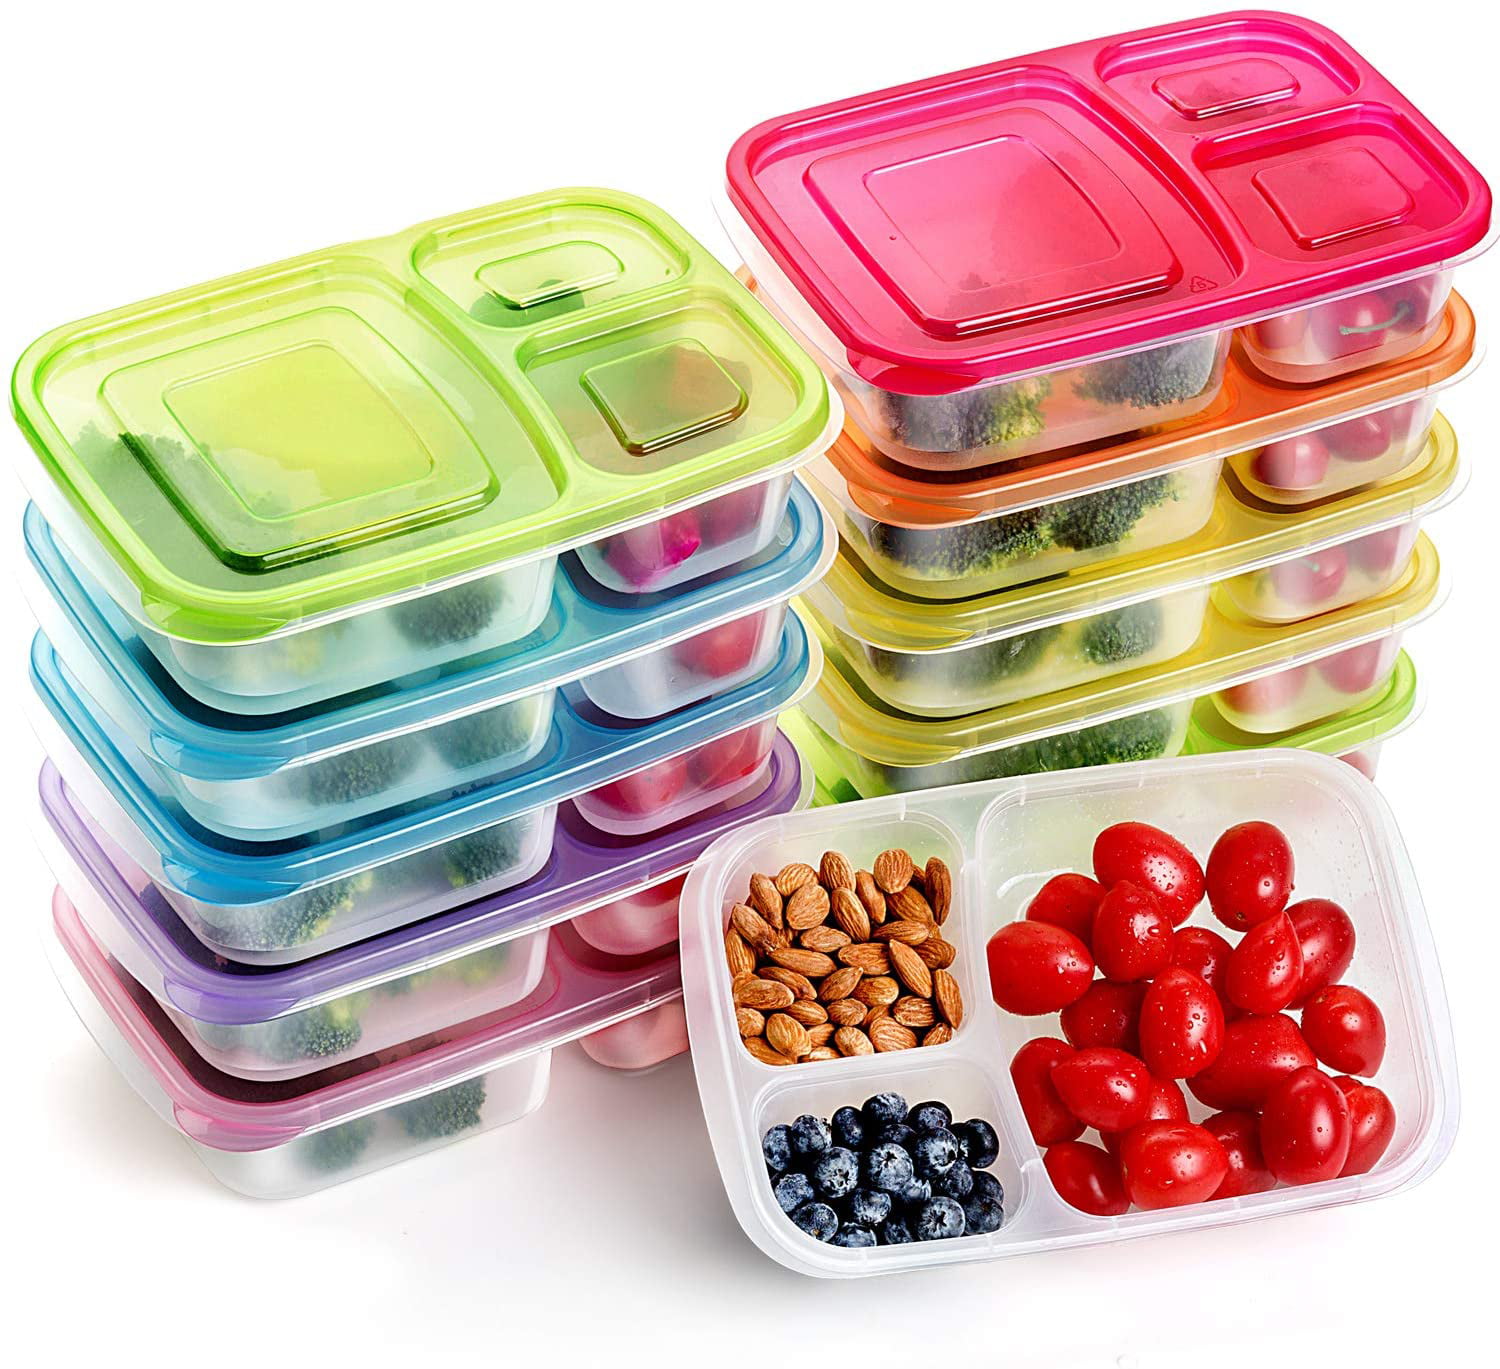 10 Pack Meal Prep Food Storage 3 Compartment Plastic Containers Reusable New 